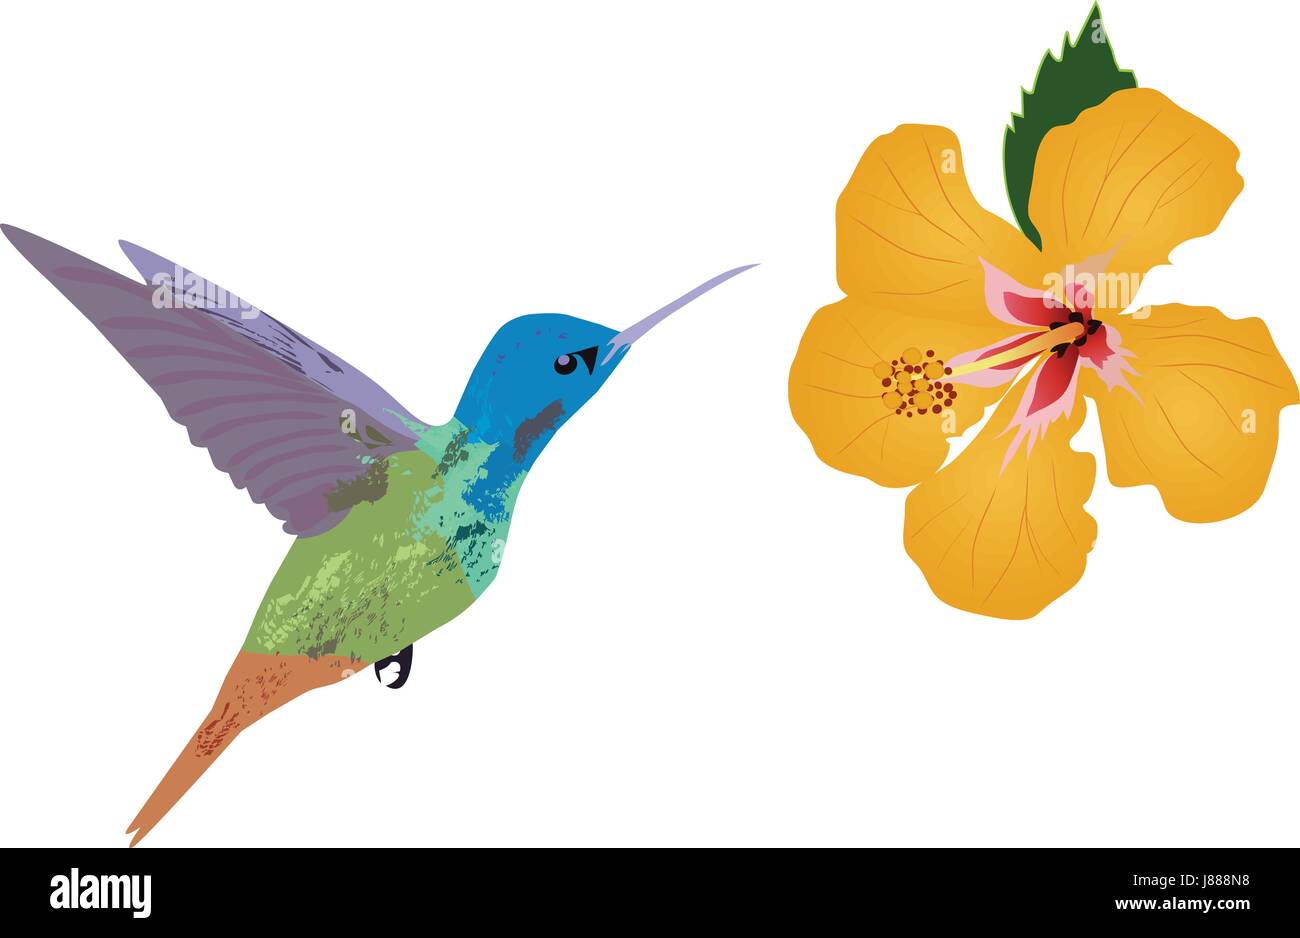 vector illustration of floral background with tropical flowers, hummingbirds Stock Vector